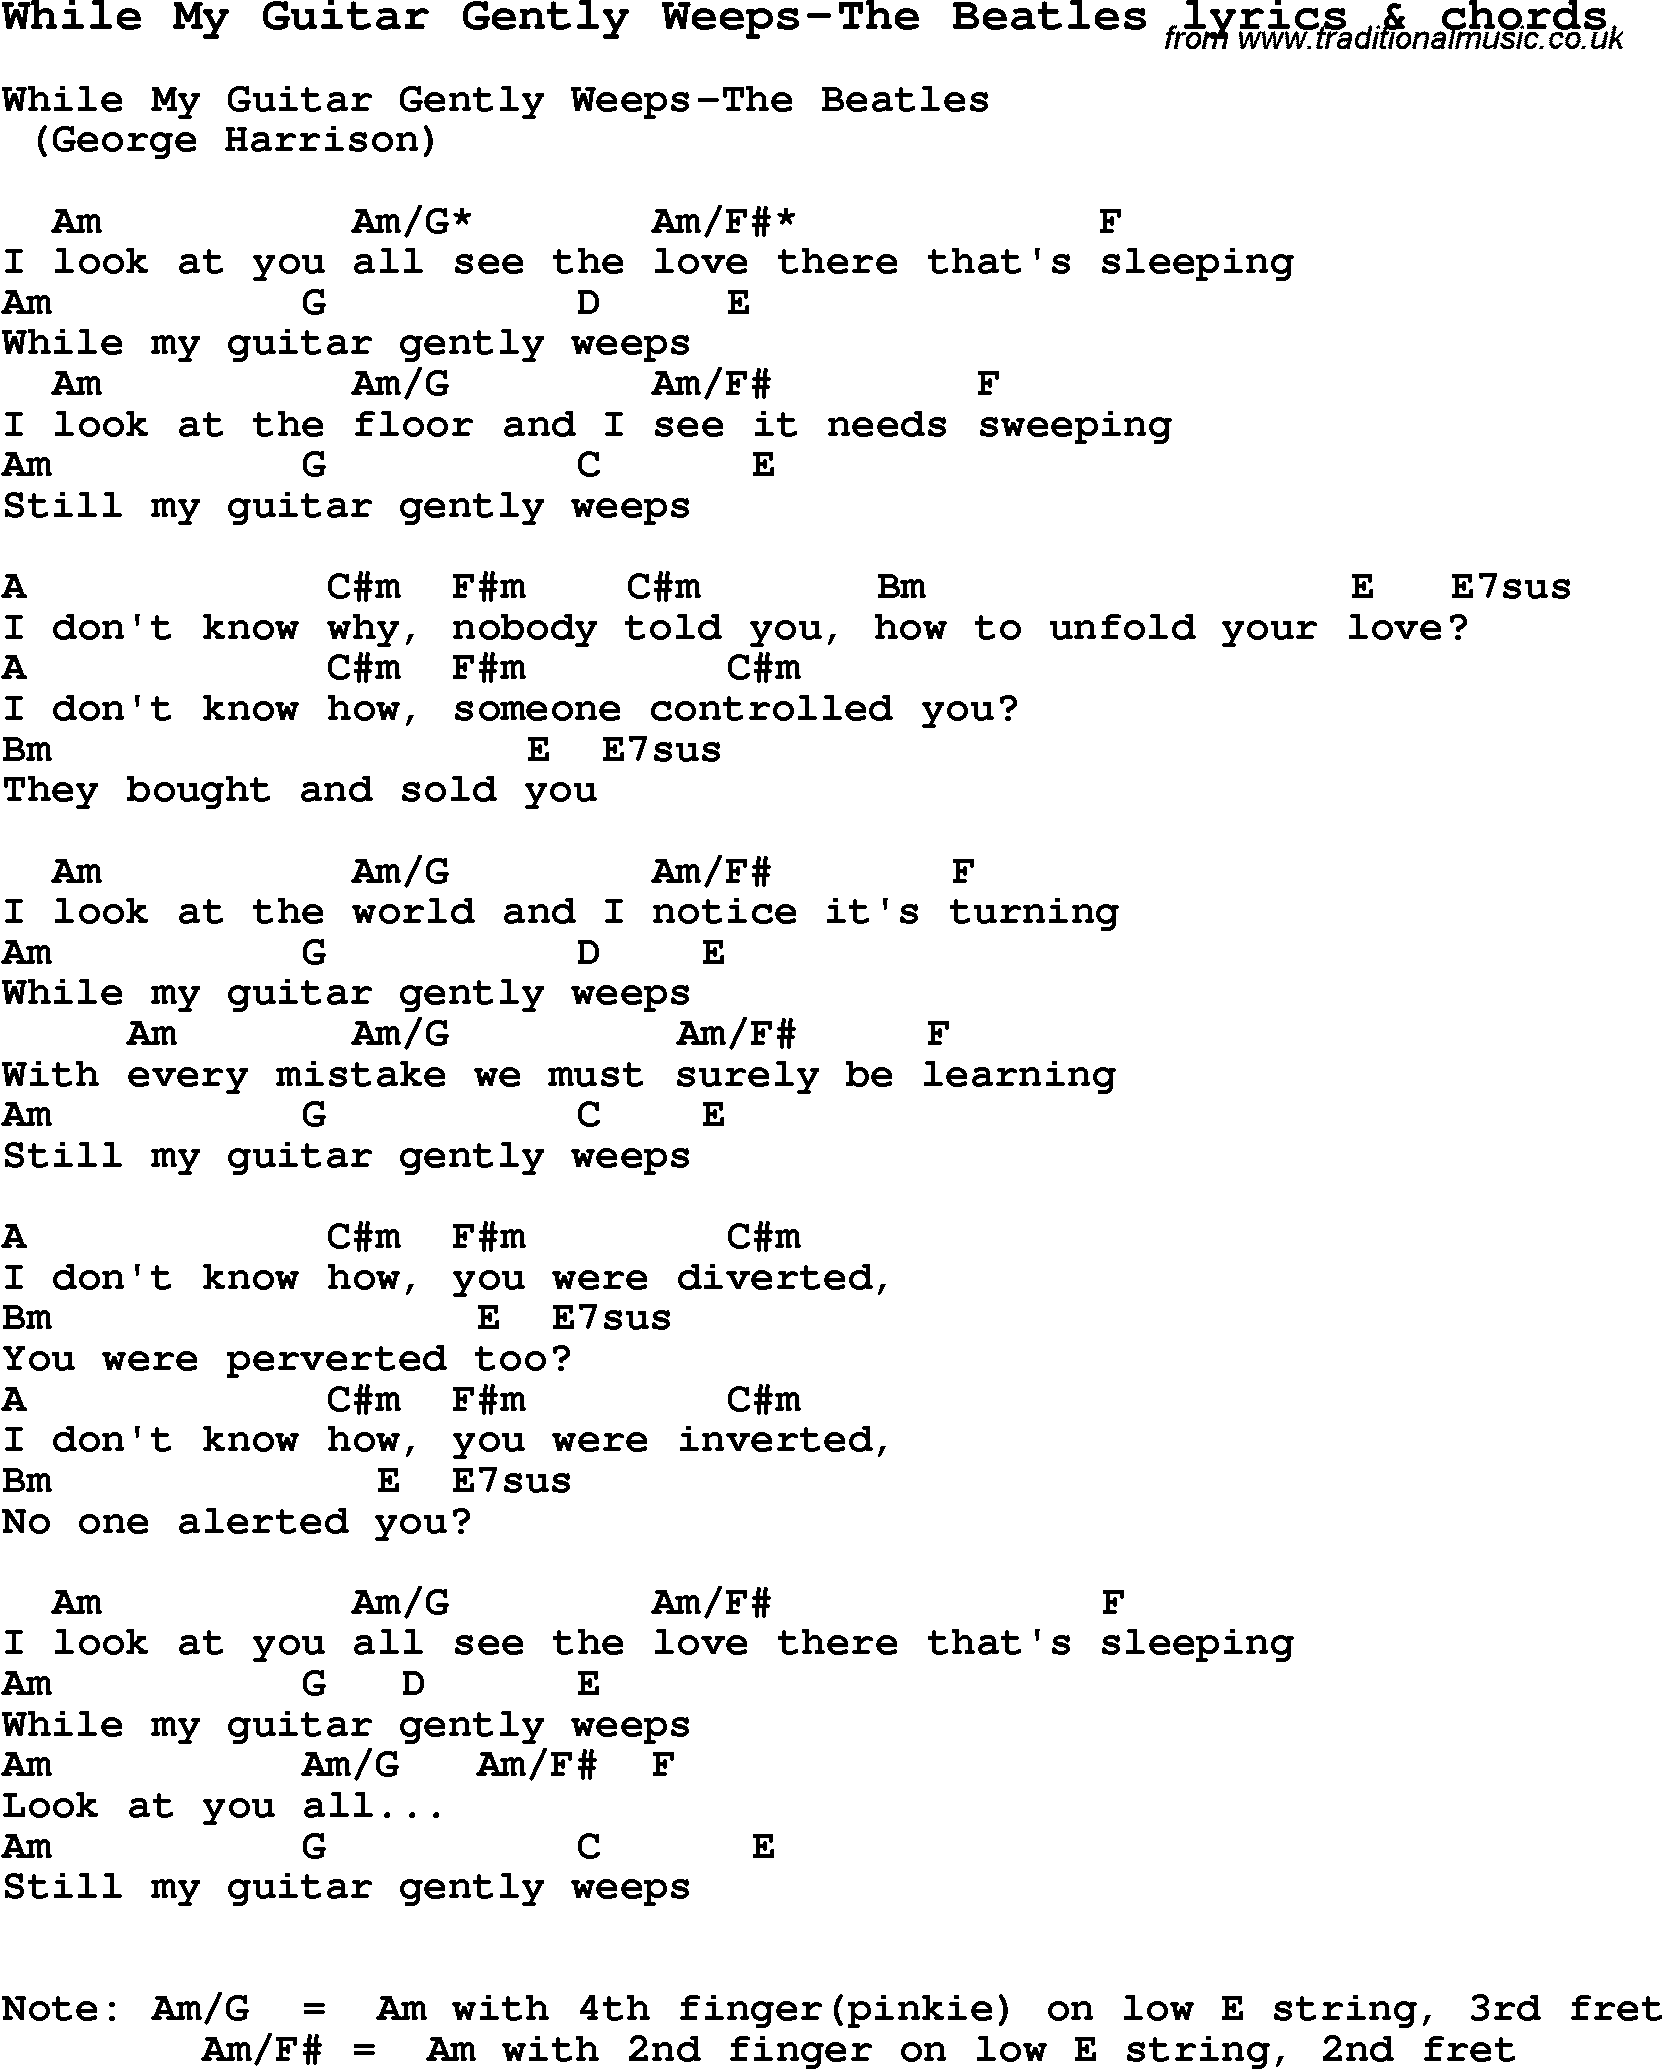 Love Song Lyrics for: While My Guitar Gently Weeps-The Beatles with chords for Ukulele, Guitar Banjo etc.